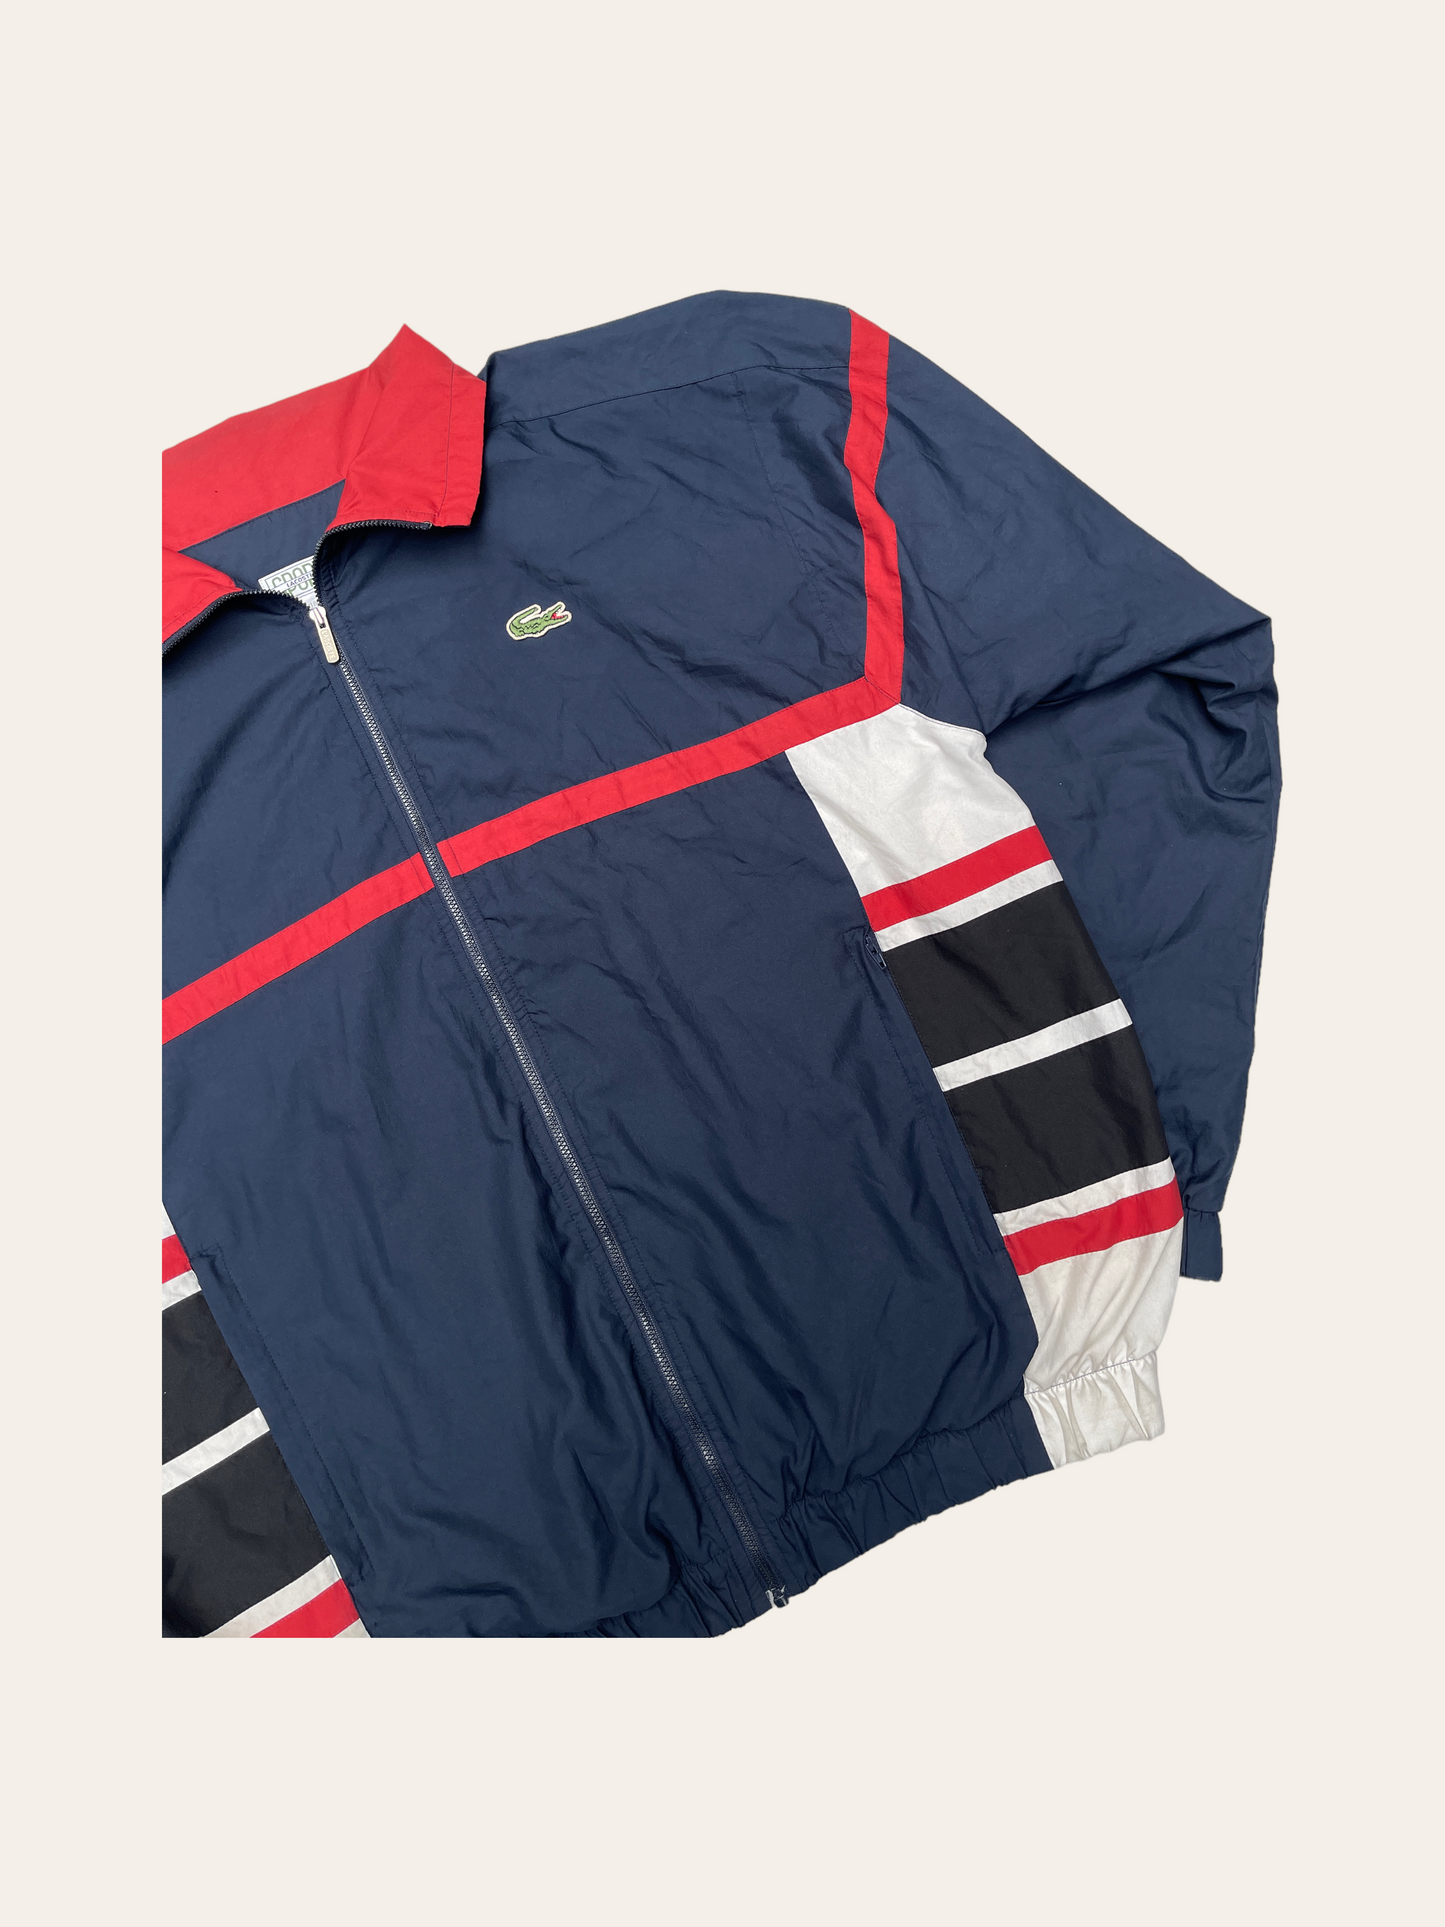 TRACKSUIT LACOSTE BLUE & RED (L)